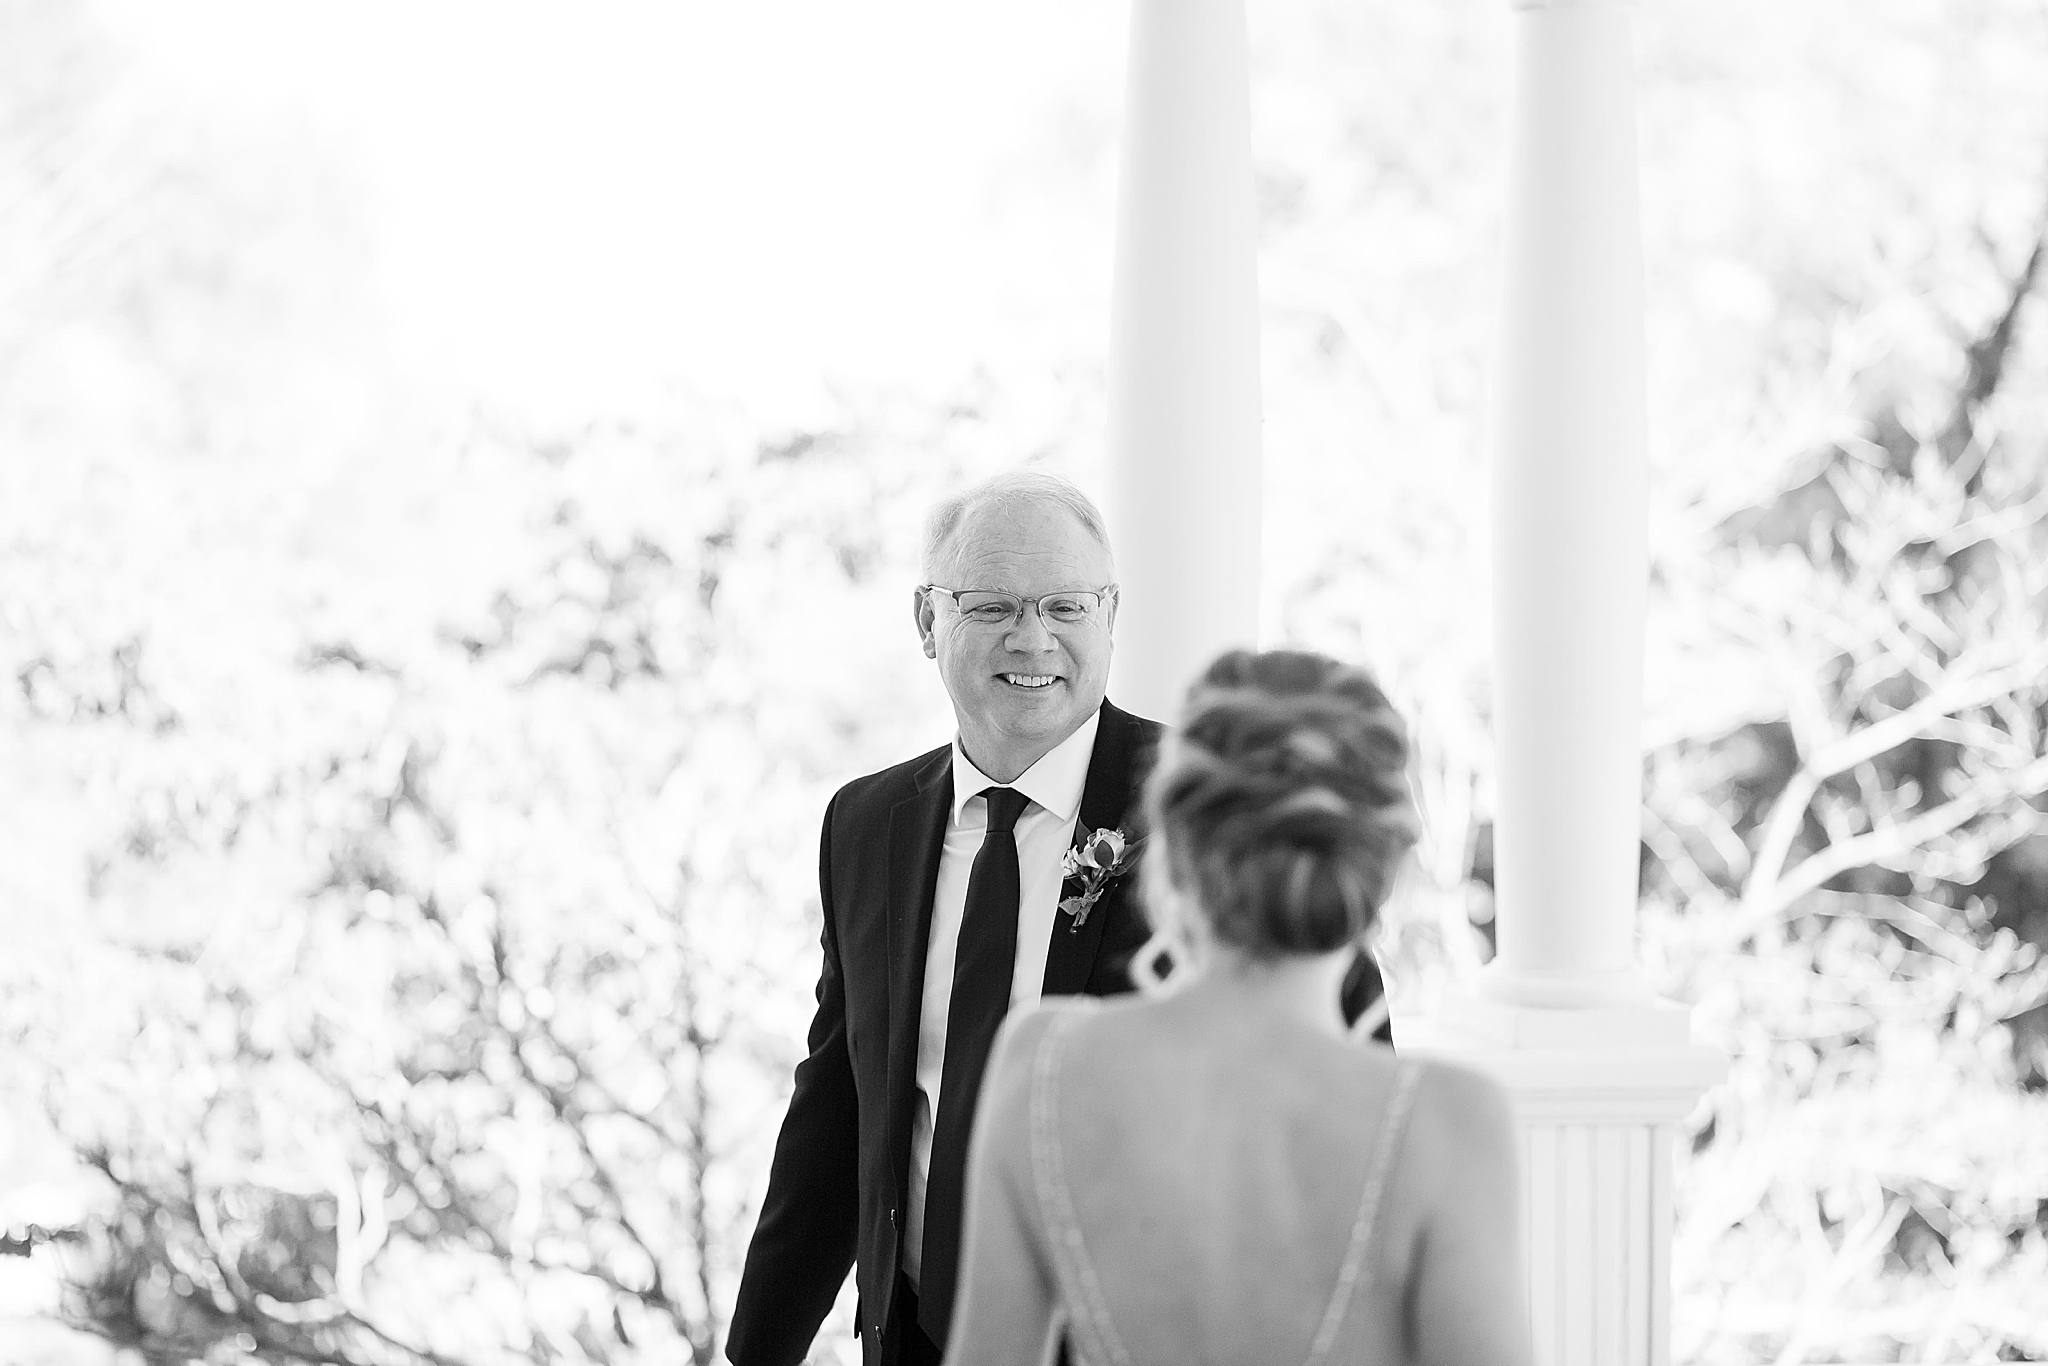 Fall Ritchie Hill Wedding day recap on first anniversary